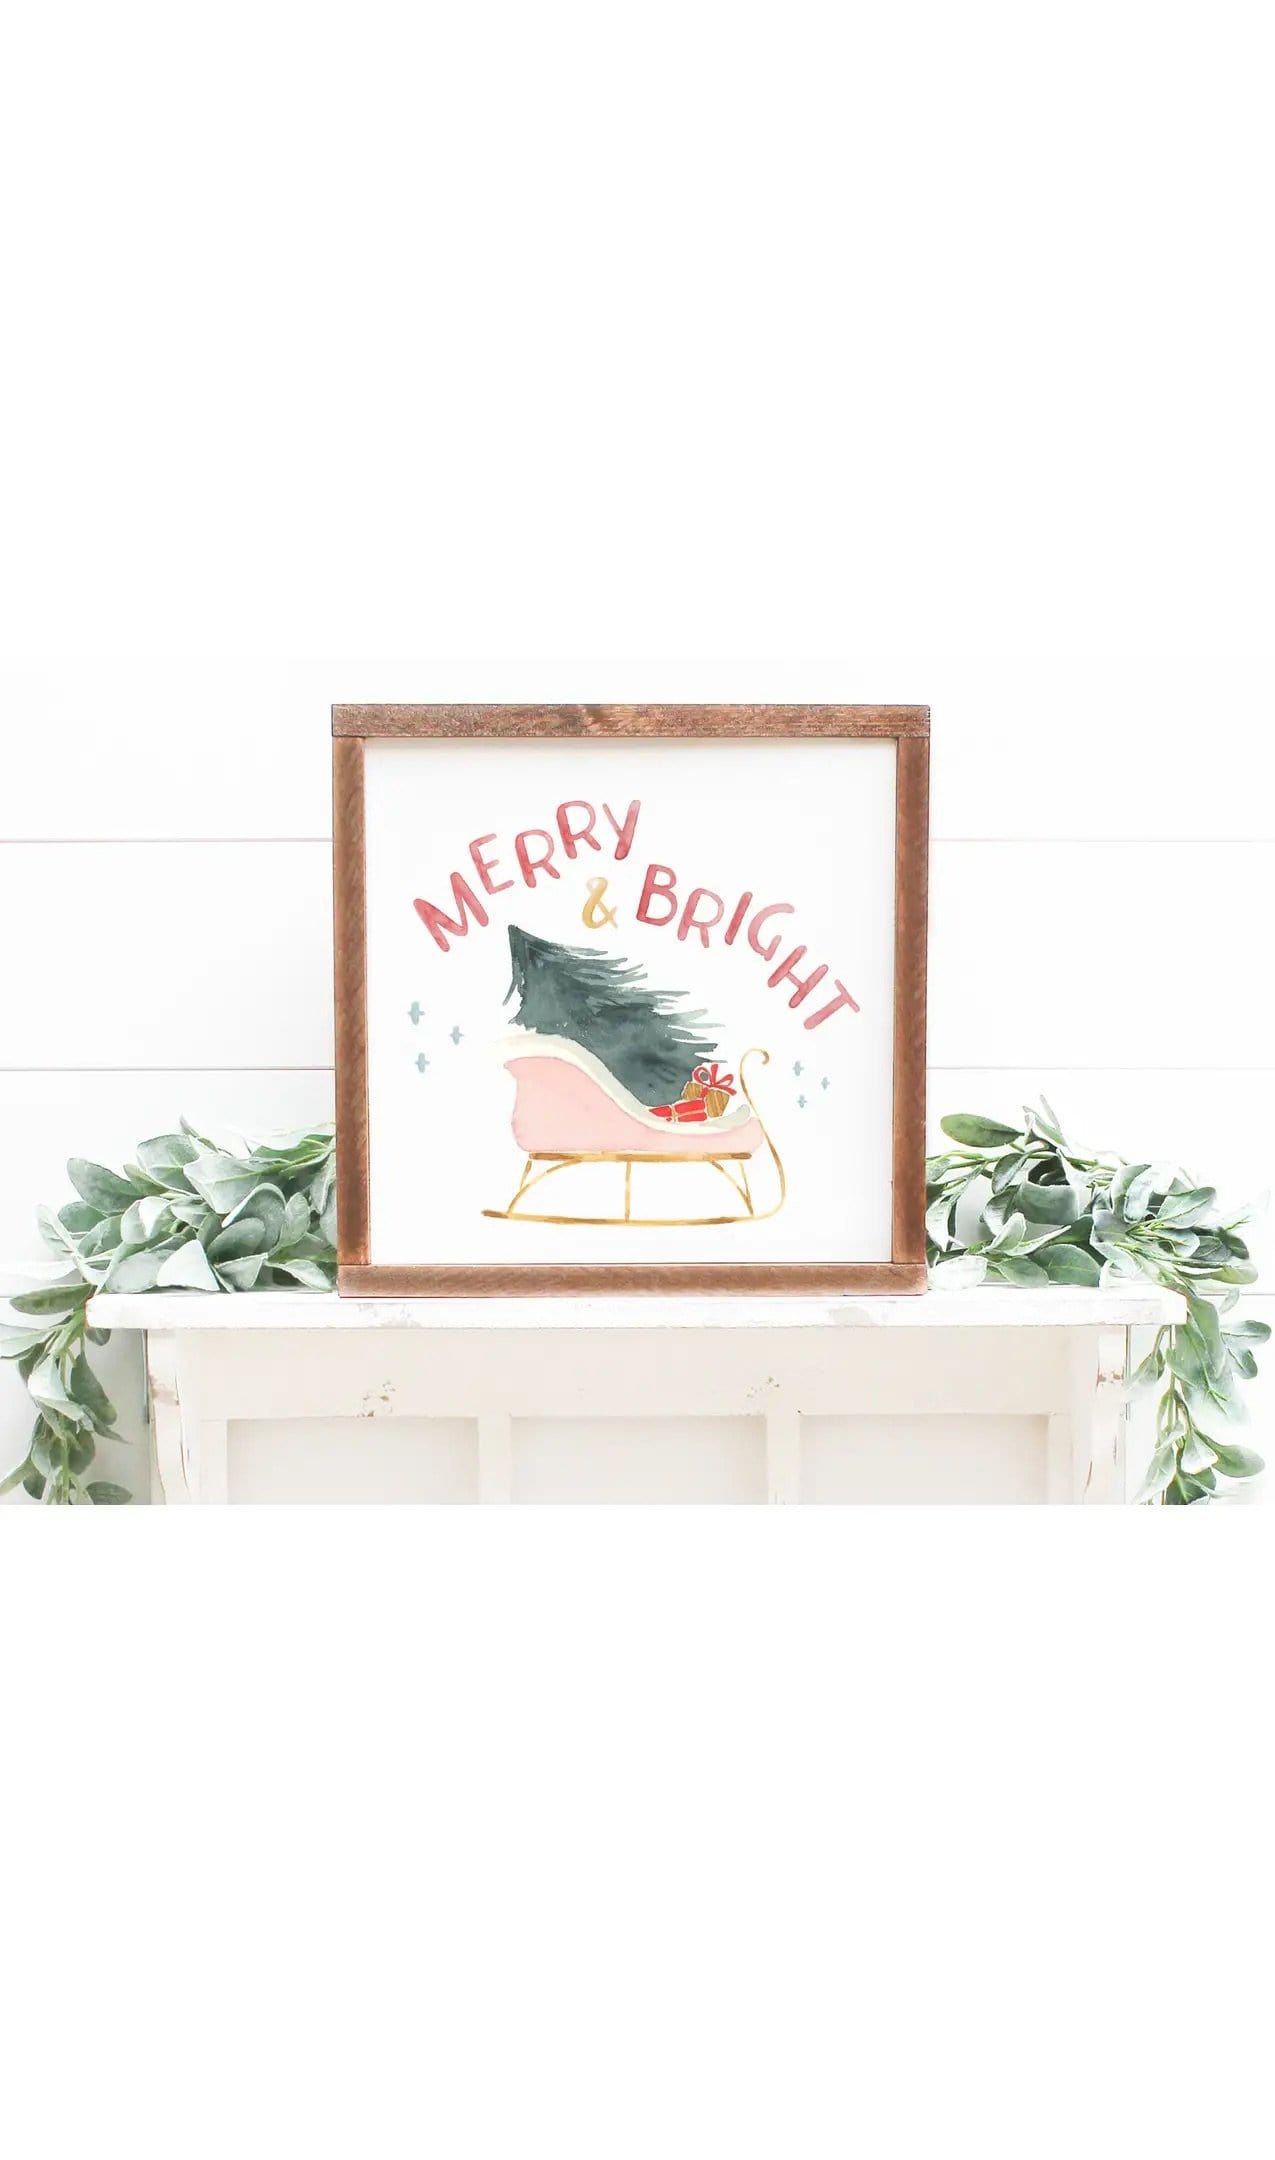 Merry & Bright Wood Sign